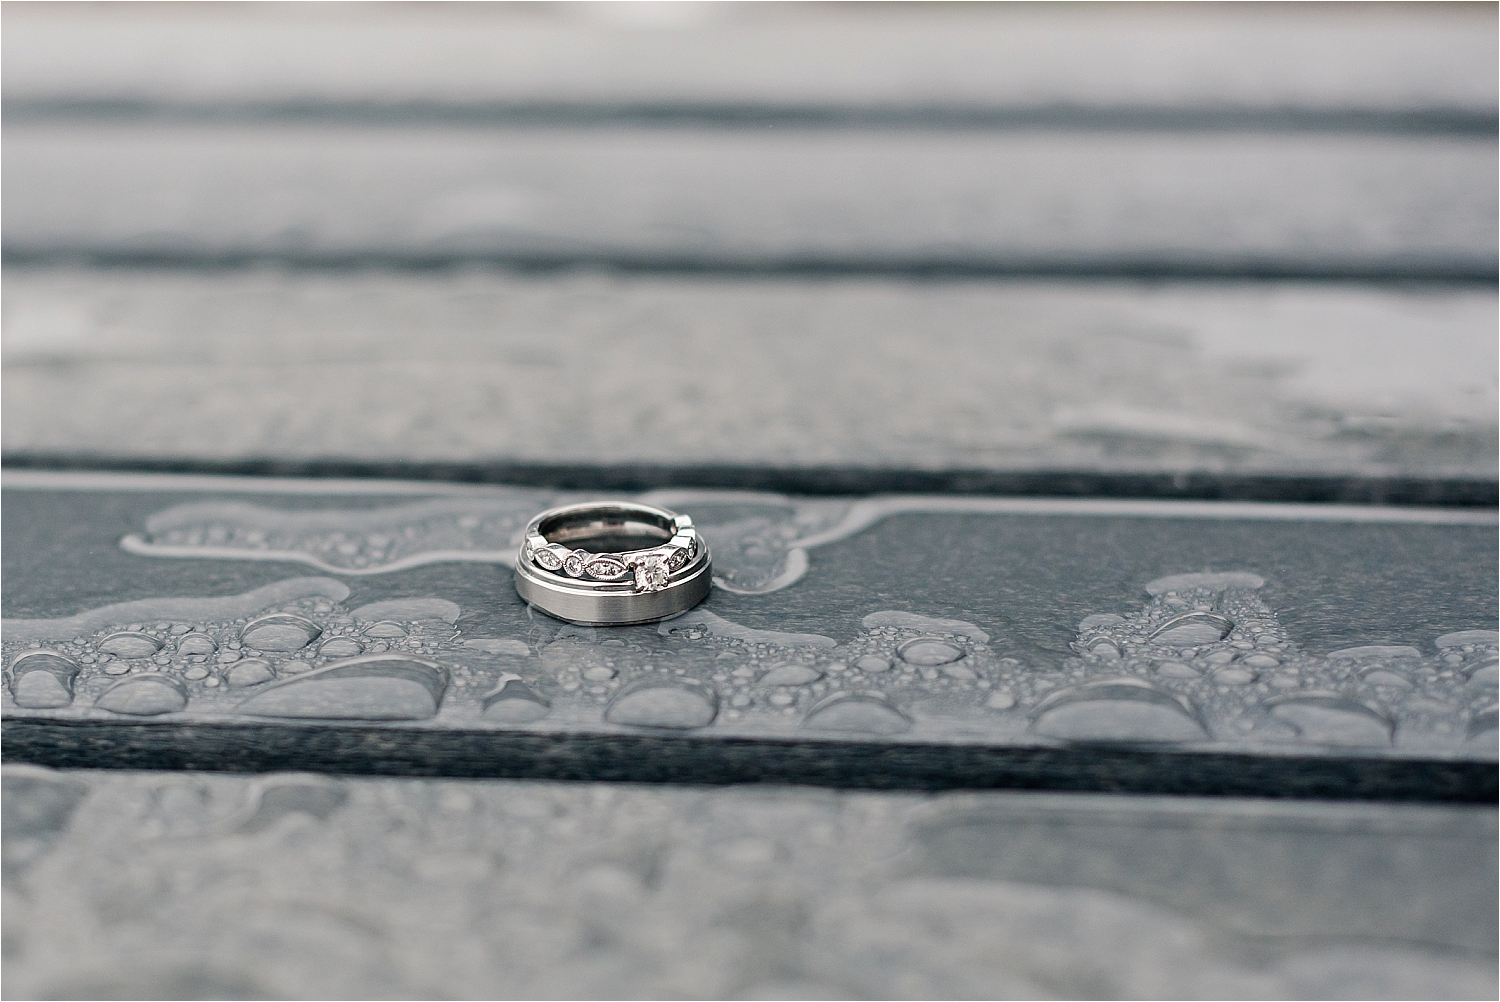 McHenry County Elopement Three Oaks Crystal Lake IL 